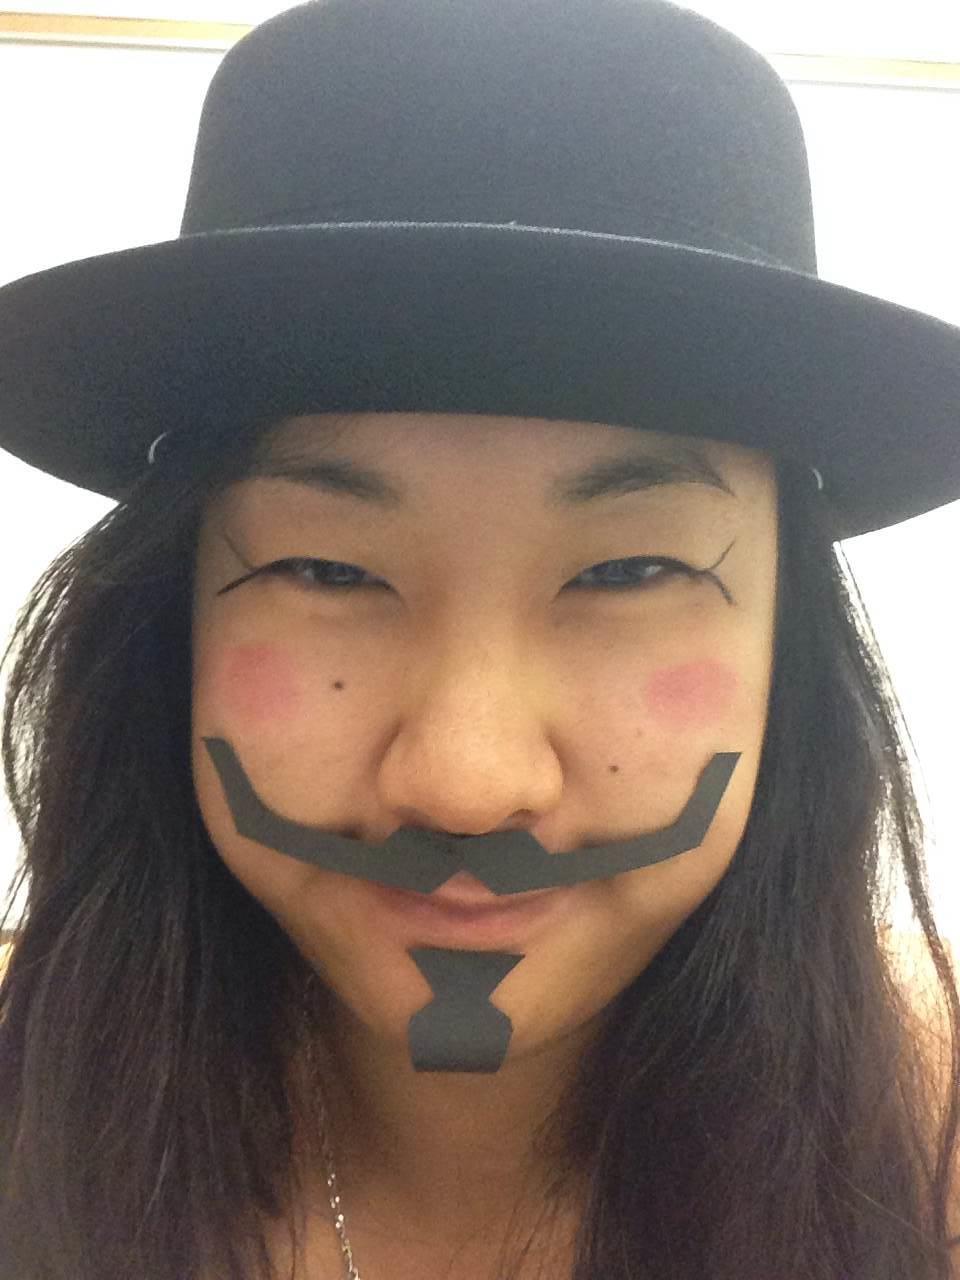 Connie Le wears fake facial hair to support Movember